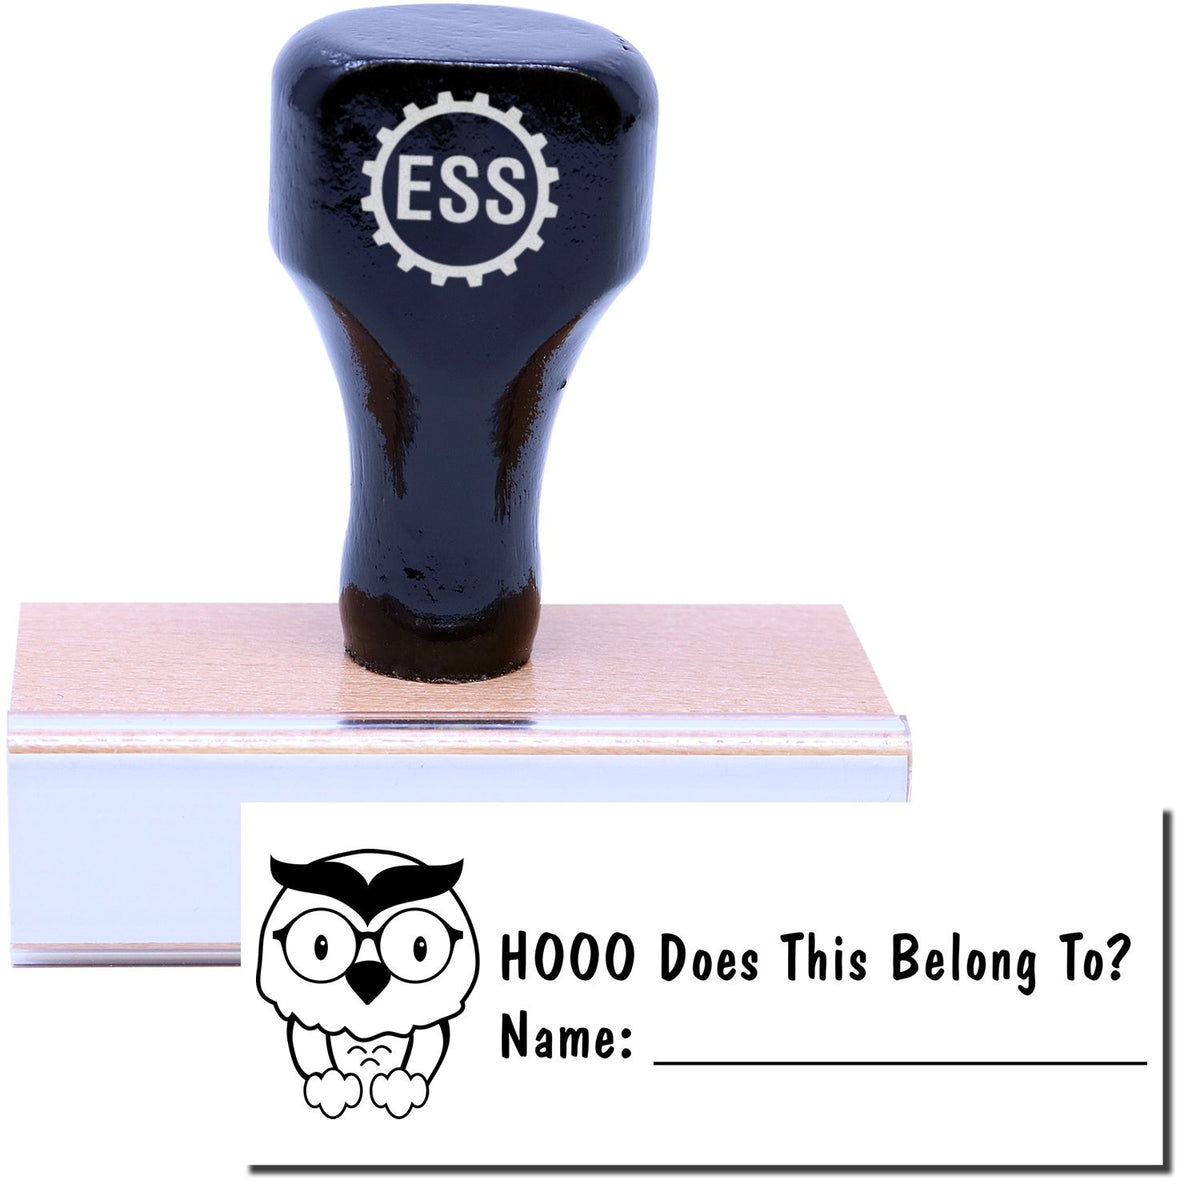 A stock office rubber stamp with a stamped image showing how the texts &quot;HOOO Does This Belong To?&quot; and &quot;Name:&quot; with a line and an image of an owl on the left side are displayed after stamping.